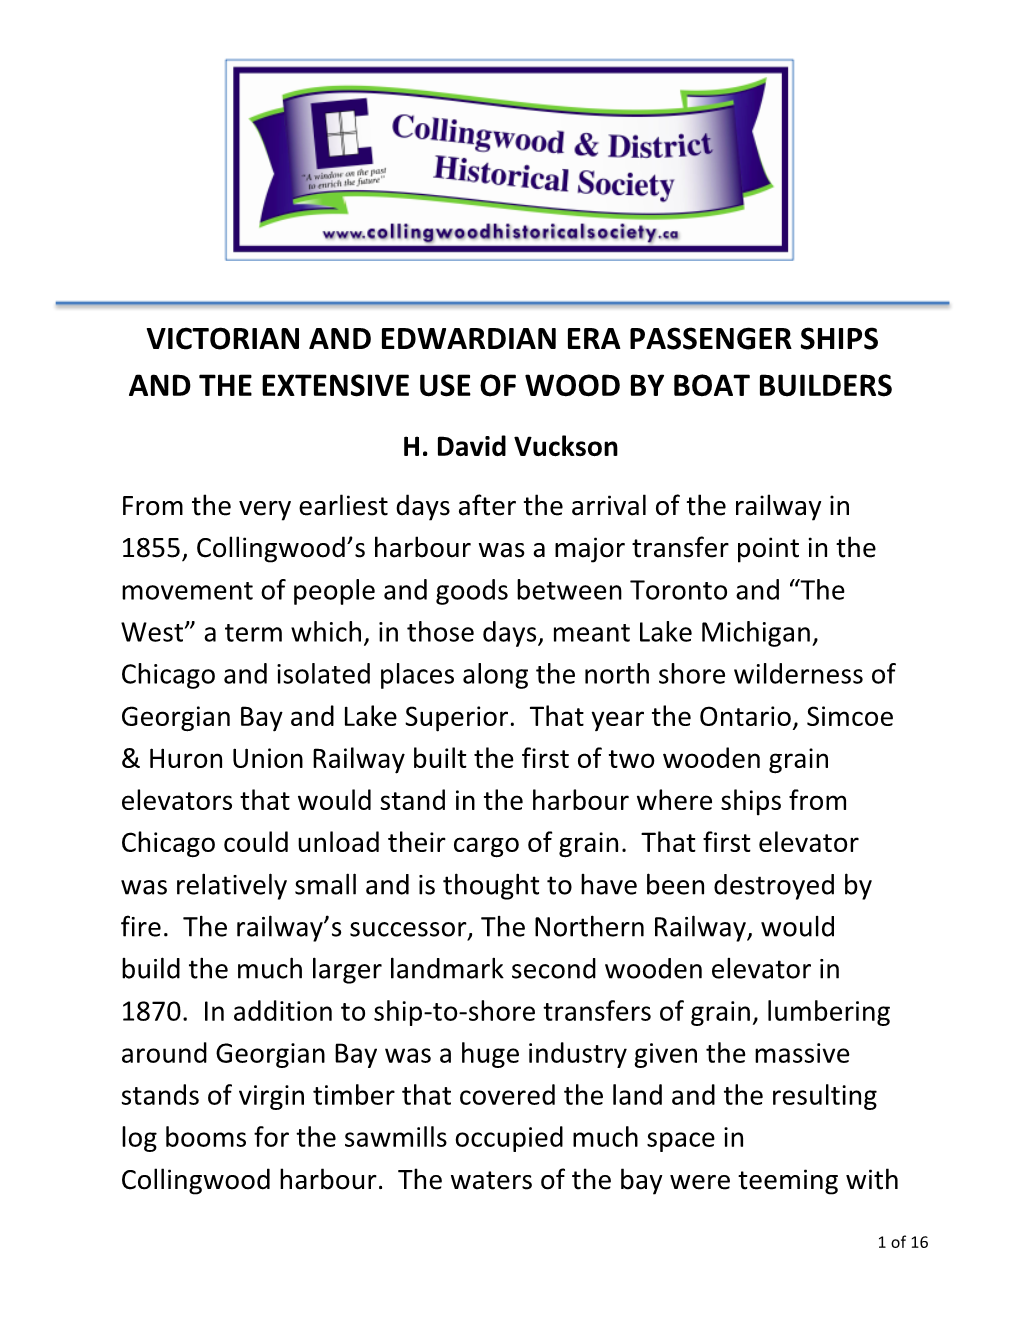 Victorian and Edwardian Era Passenger Ships and the Extensive Use of Wood by Boat Builders H